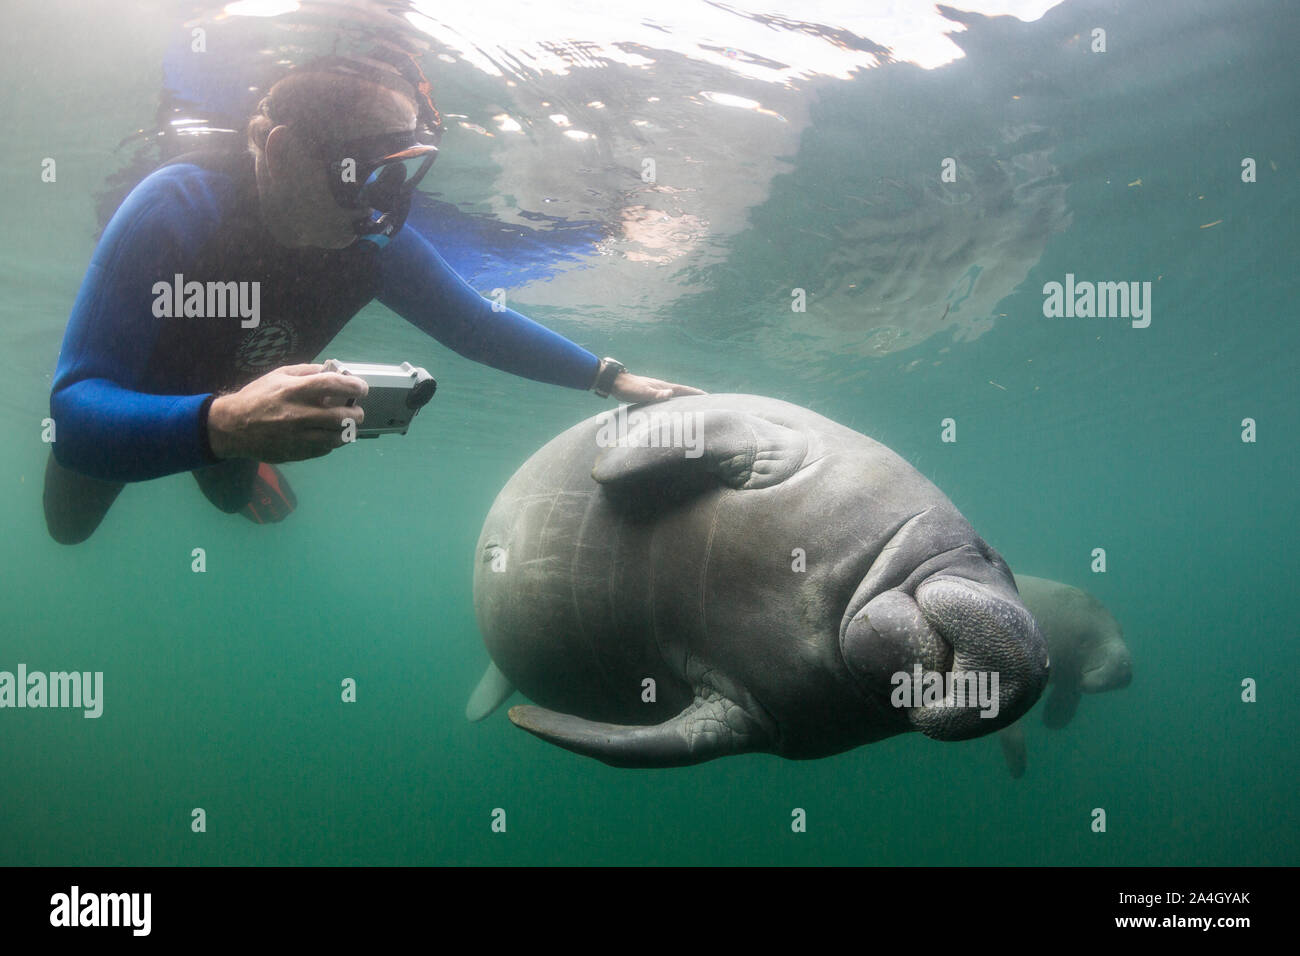 A snorkeler reaches out to touch a manatee, a widely discouraged action, in Crystal River, Florida. Stock Photo